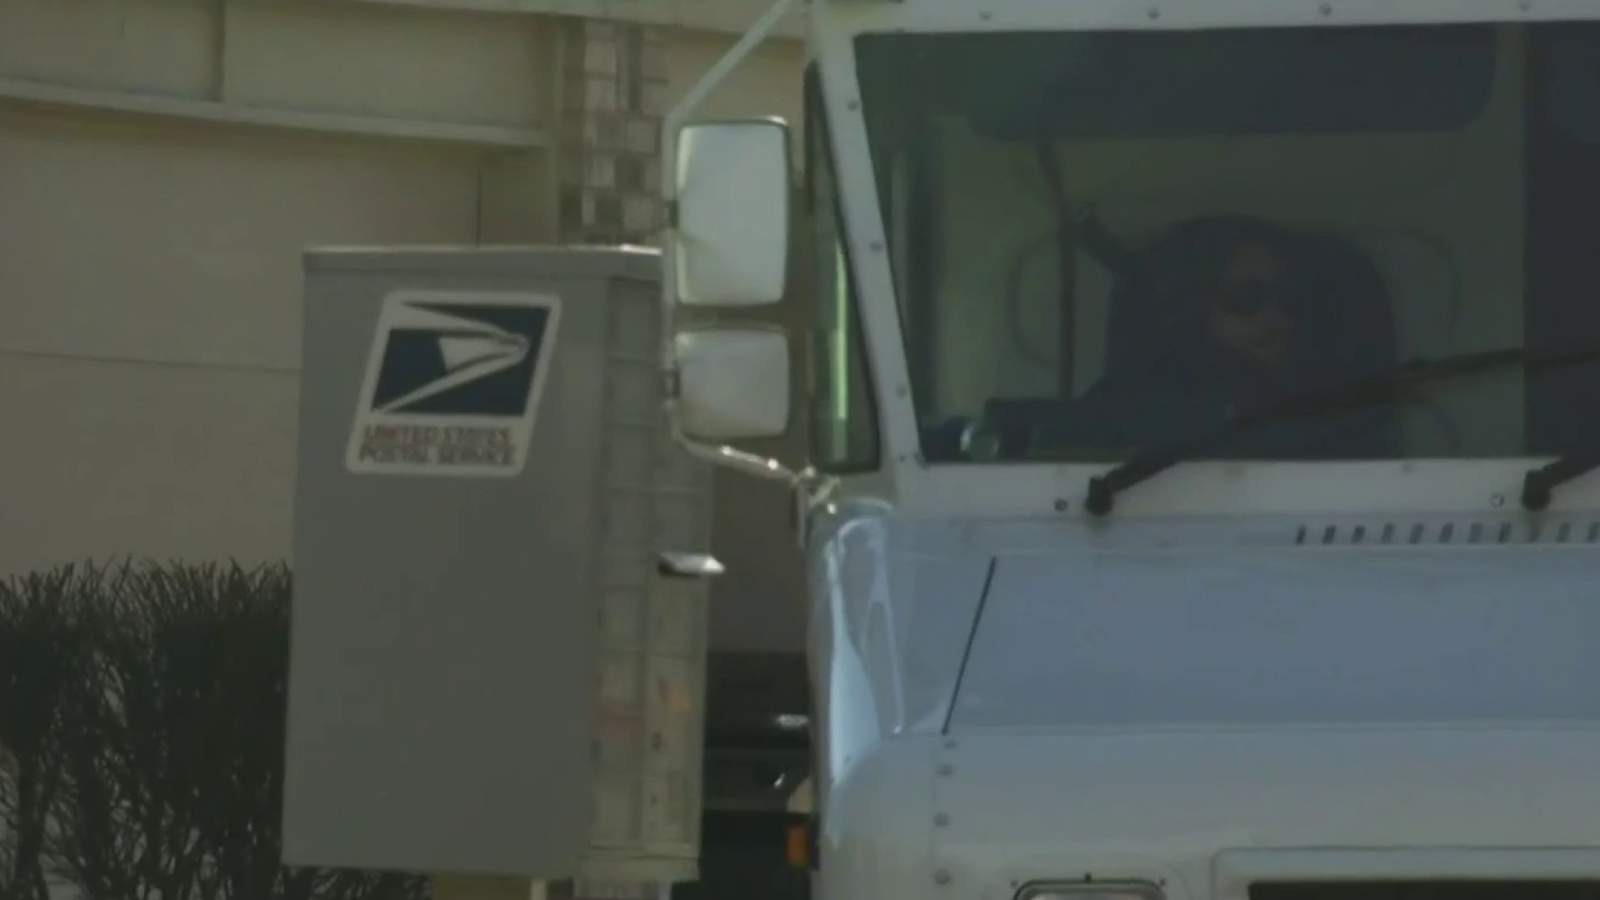 Have you noticed mail delays? Metro Detroit residents share their experiences